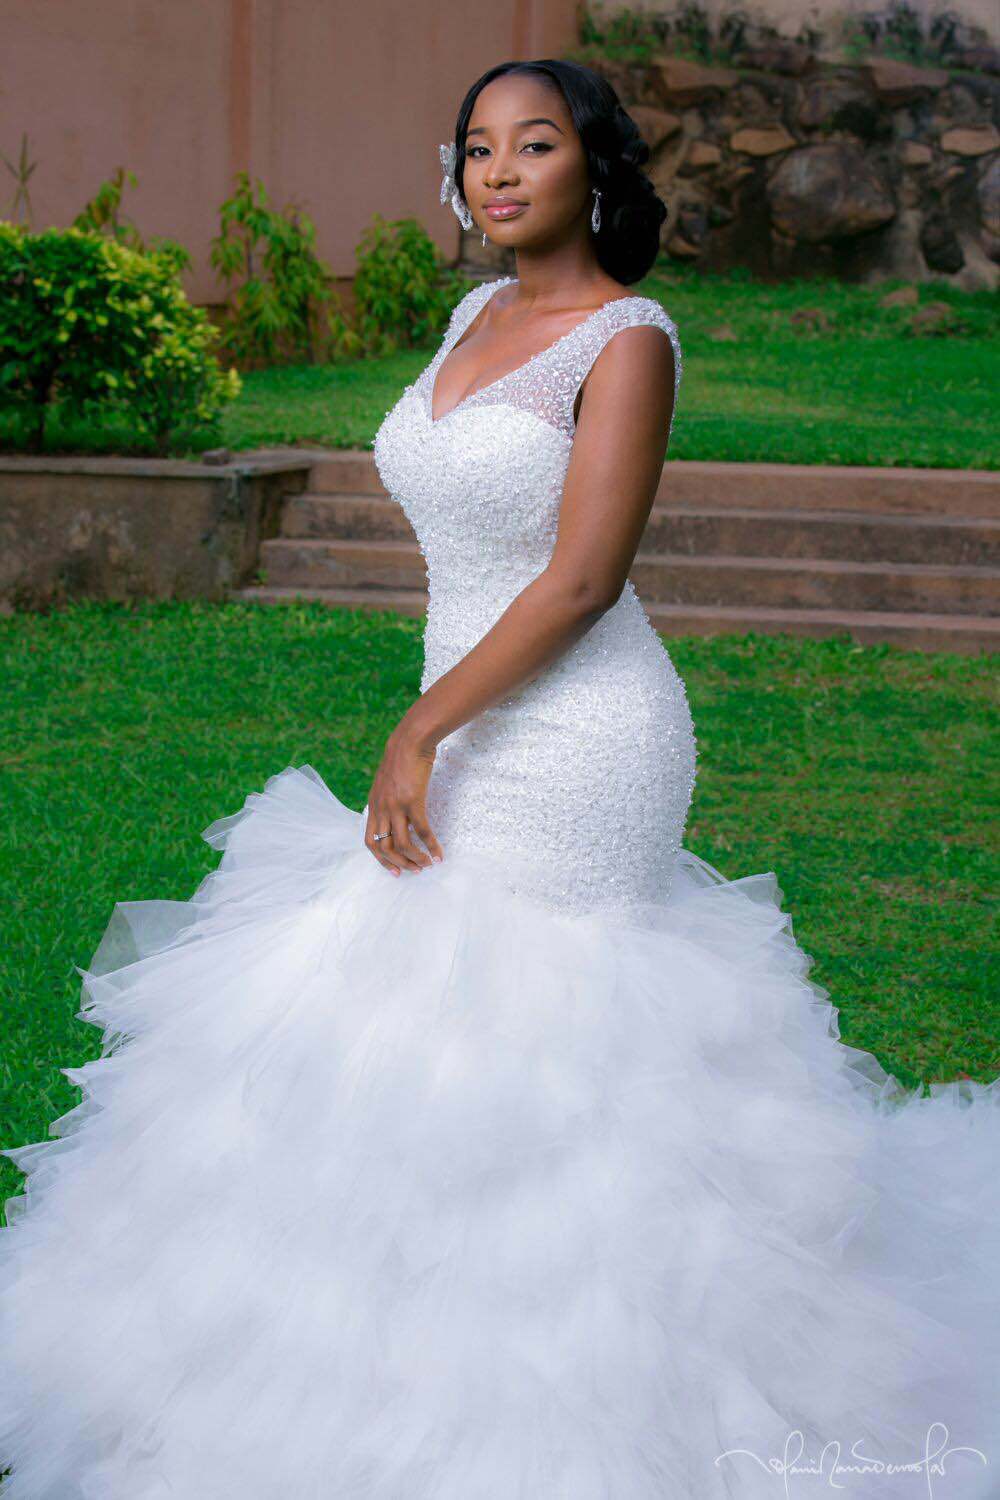 Wedding Gowns And Brides 45